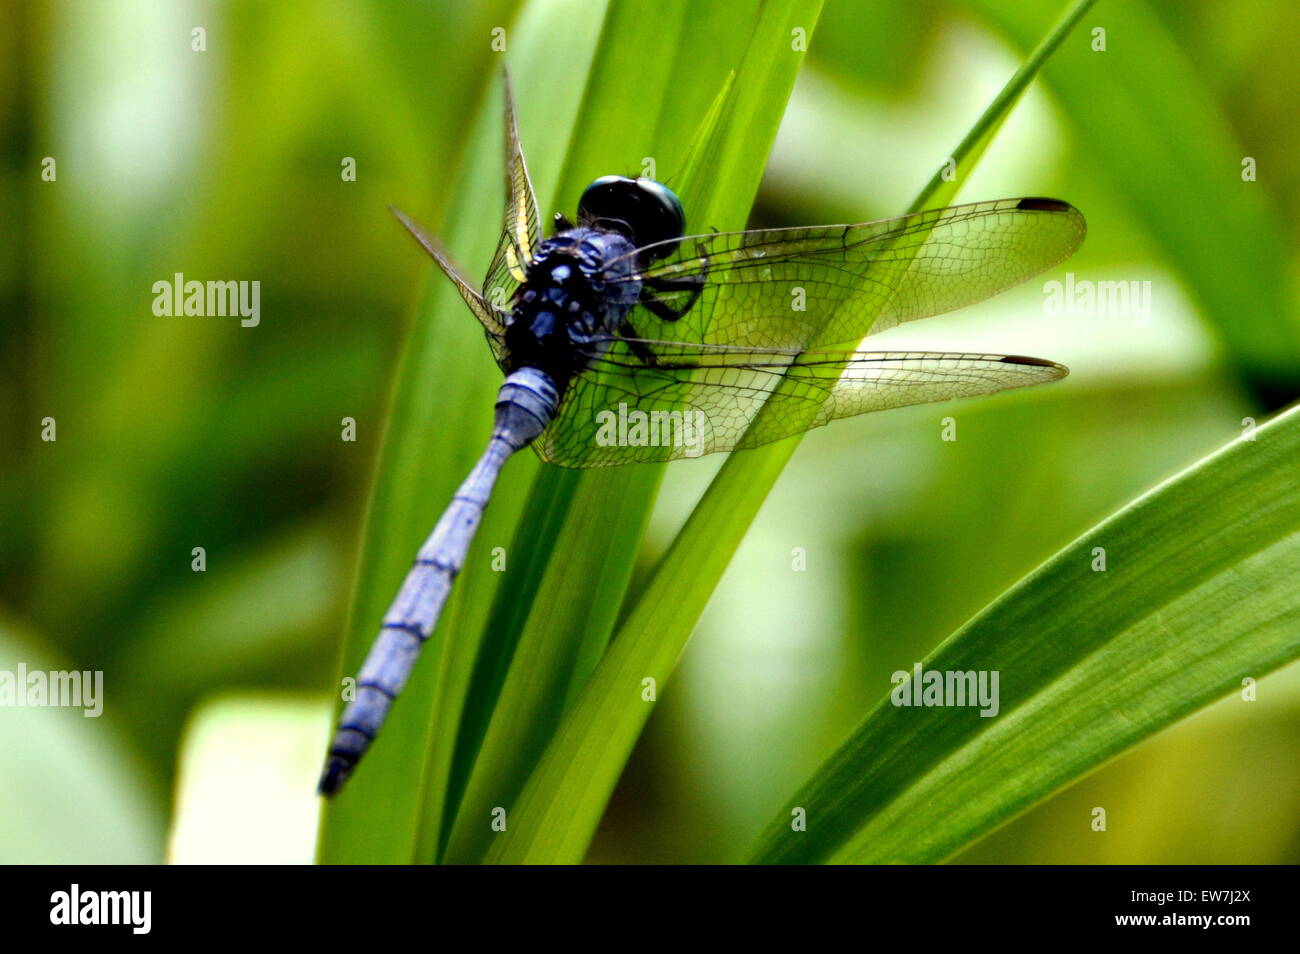 Dragonfly, wild nature, unusual dragonfly in Mauritius island Stock Photo